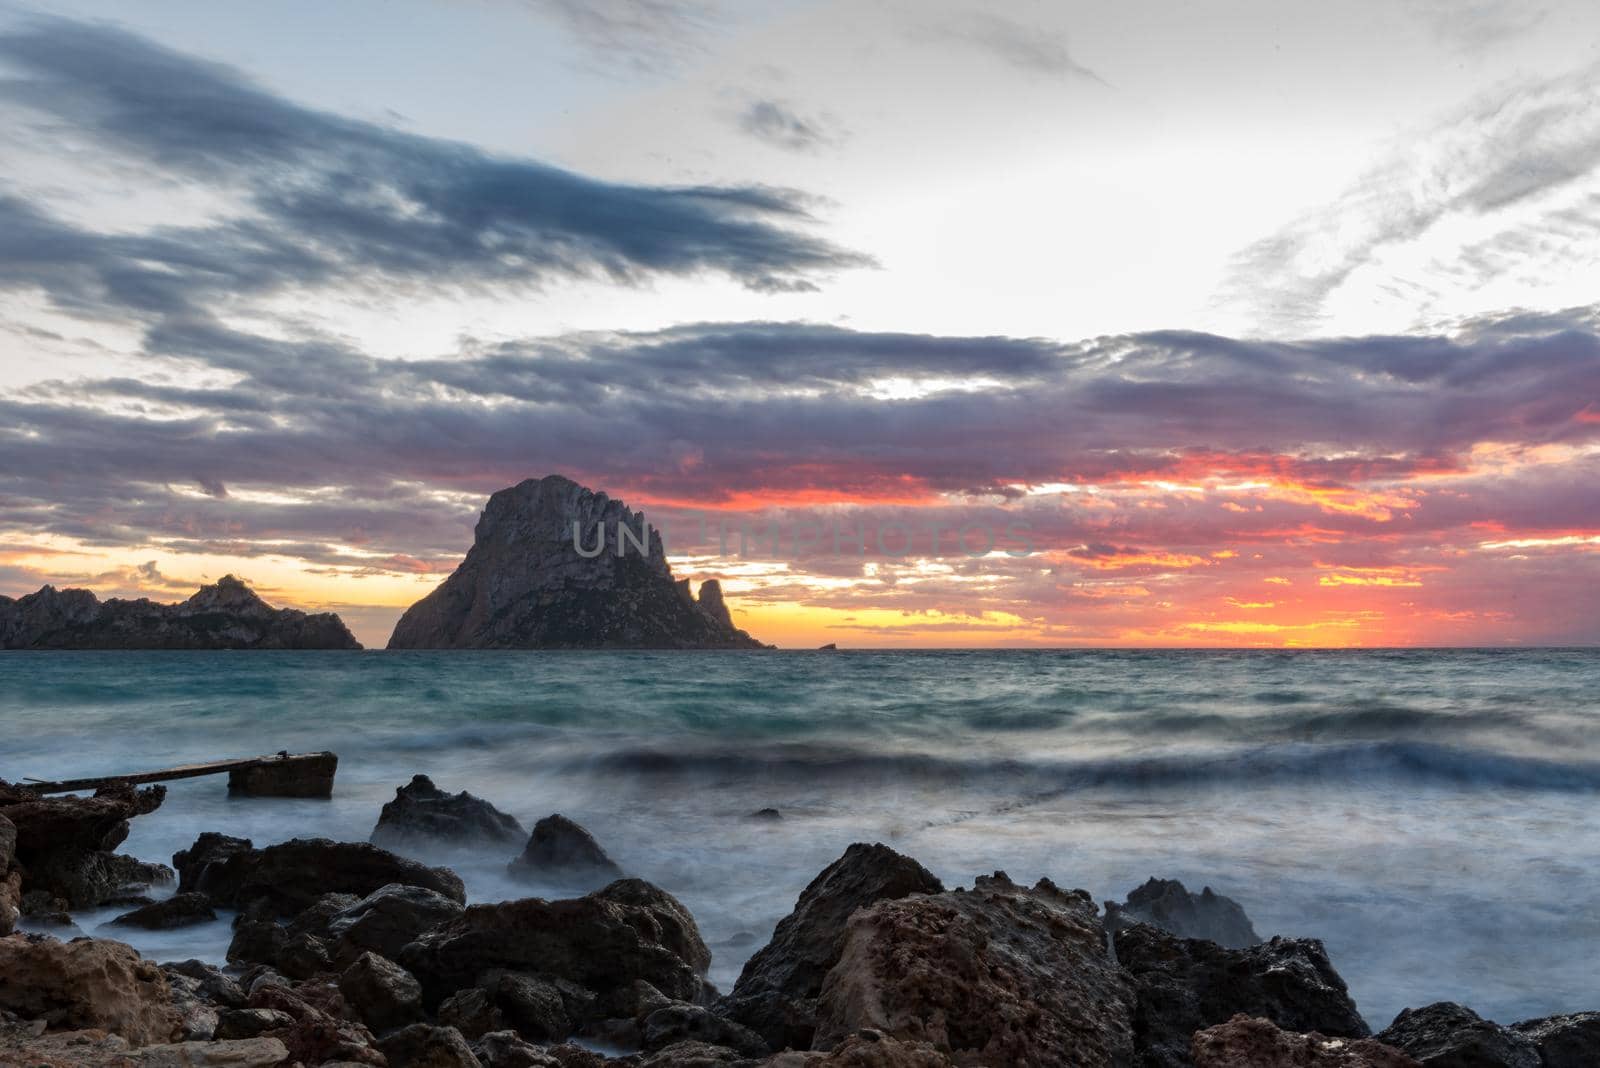 Small wooden pier in Cala d'Hort bay and view of Es Vedra island, Ibiza island, Spain  by martinscphoto